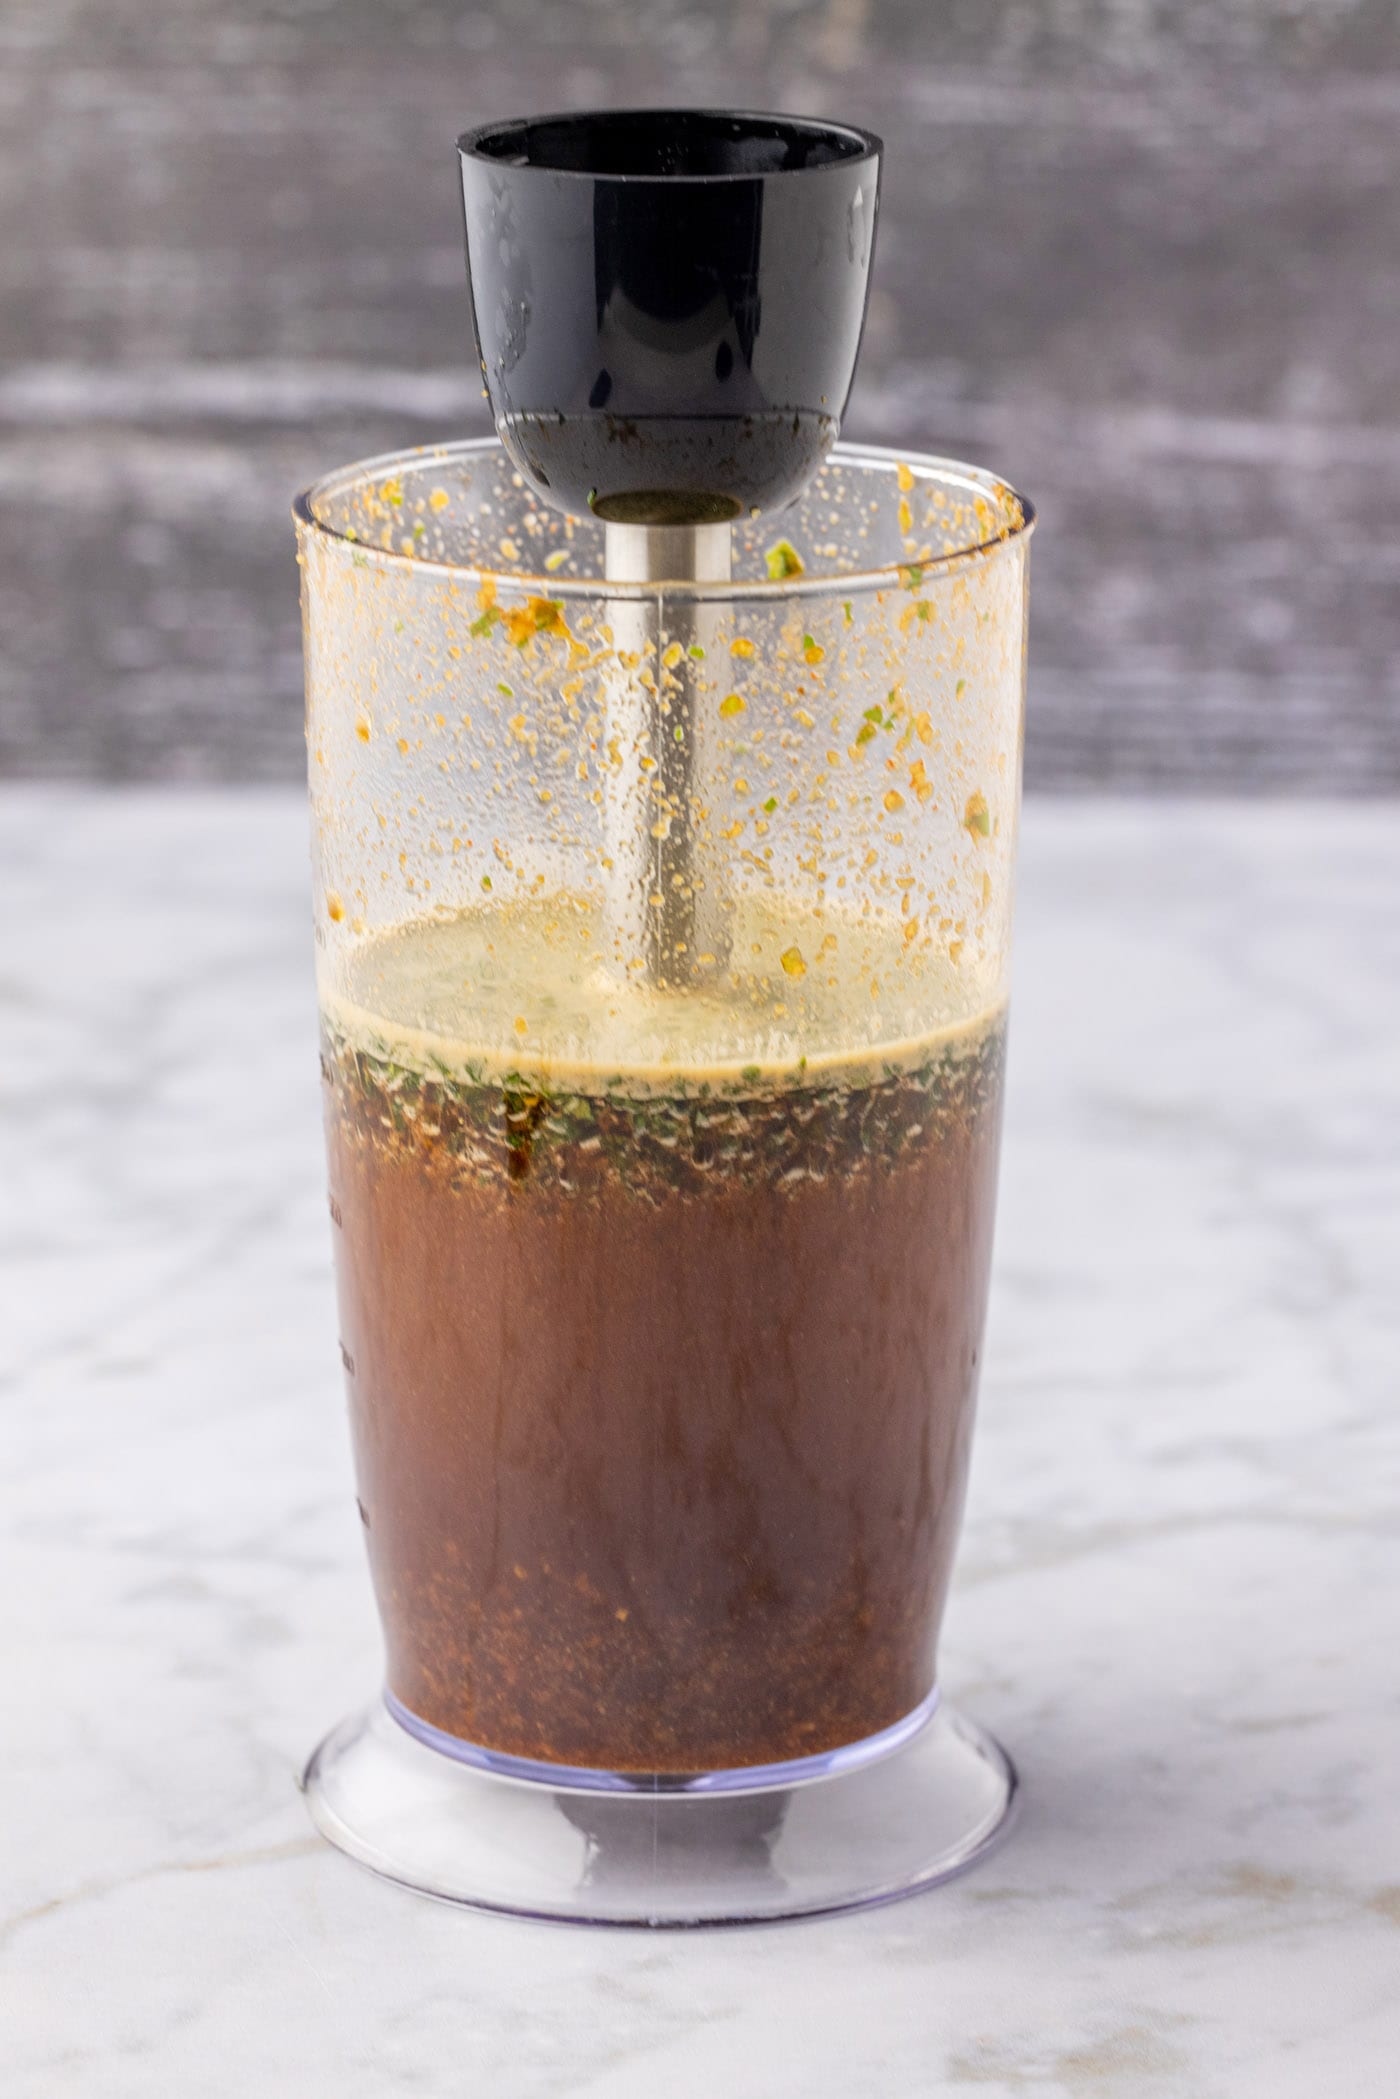 blitzing marinde ingredients with an immersion blender